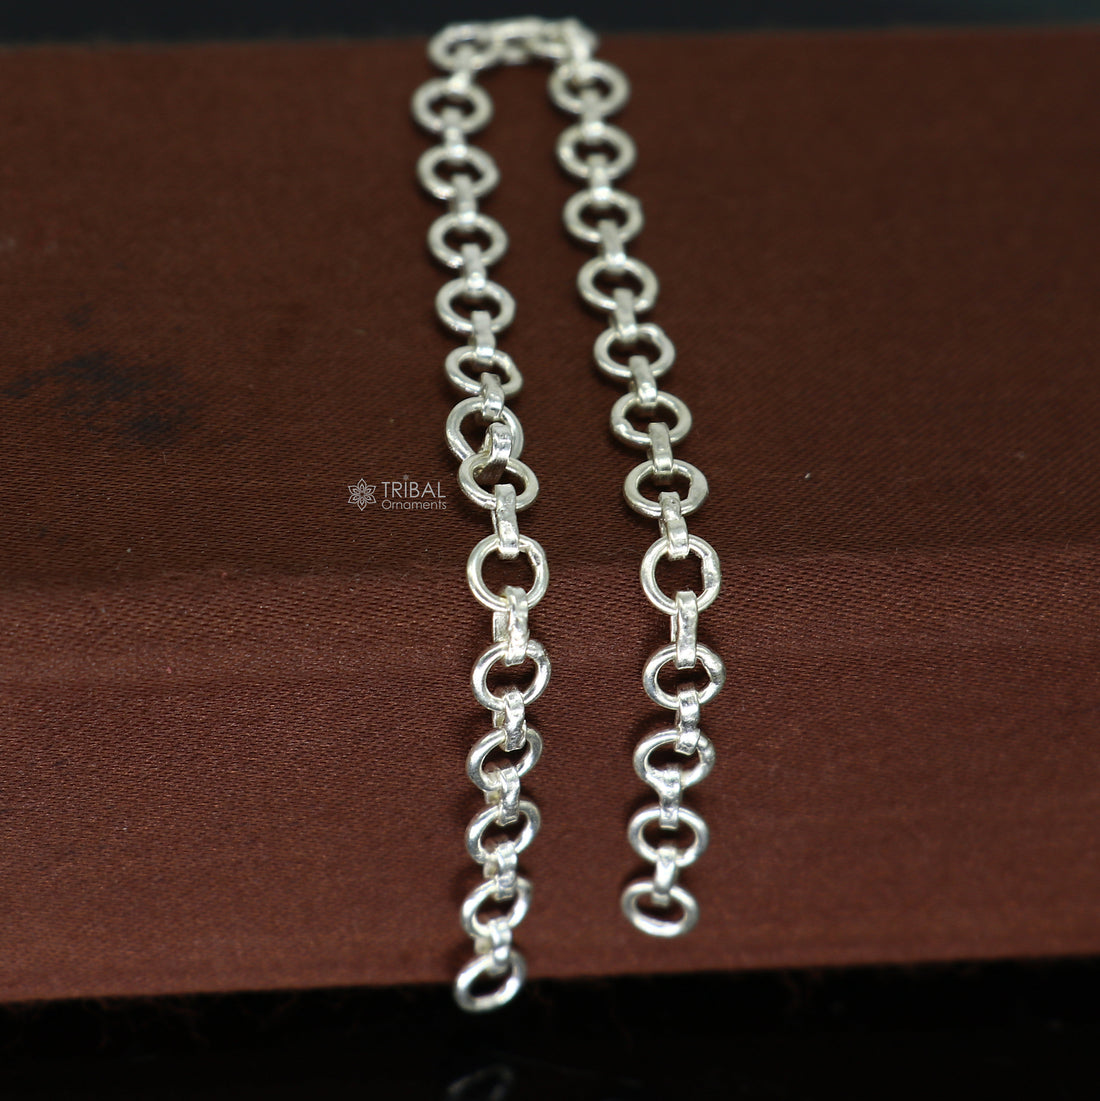 2" to 30" 925 sterling silver multipurpose 5mm extended links or jump ring for increasing length of jewelry,or use directly as jewelry ch565 - TRIBAL ORNAMENTS